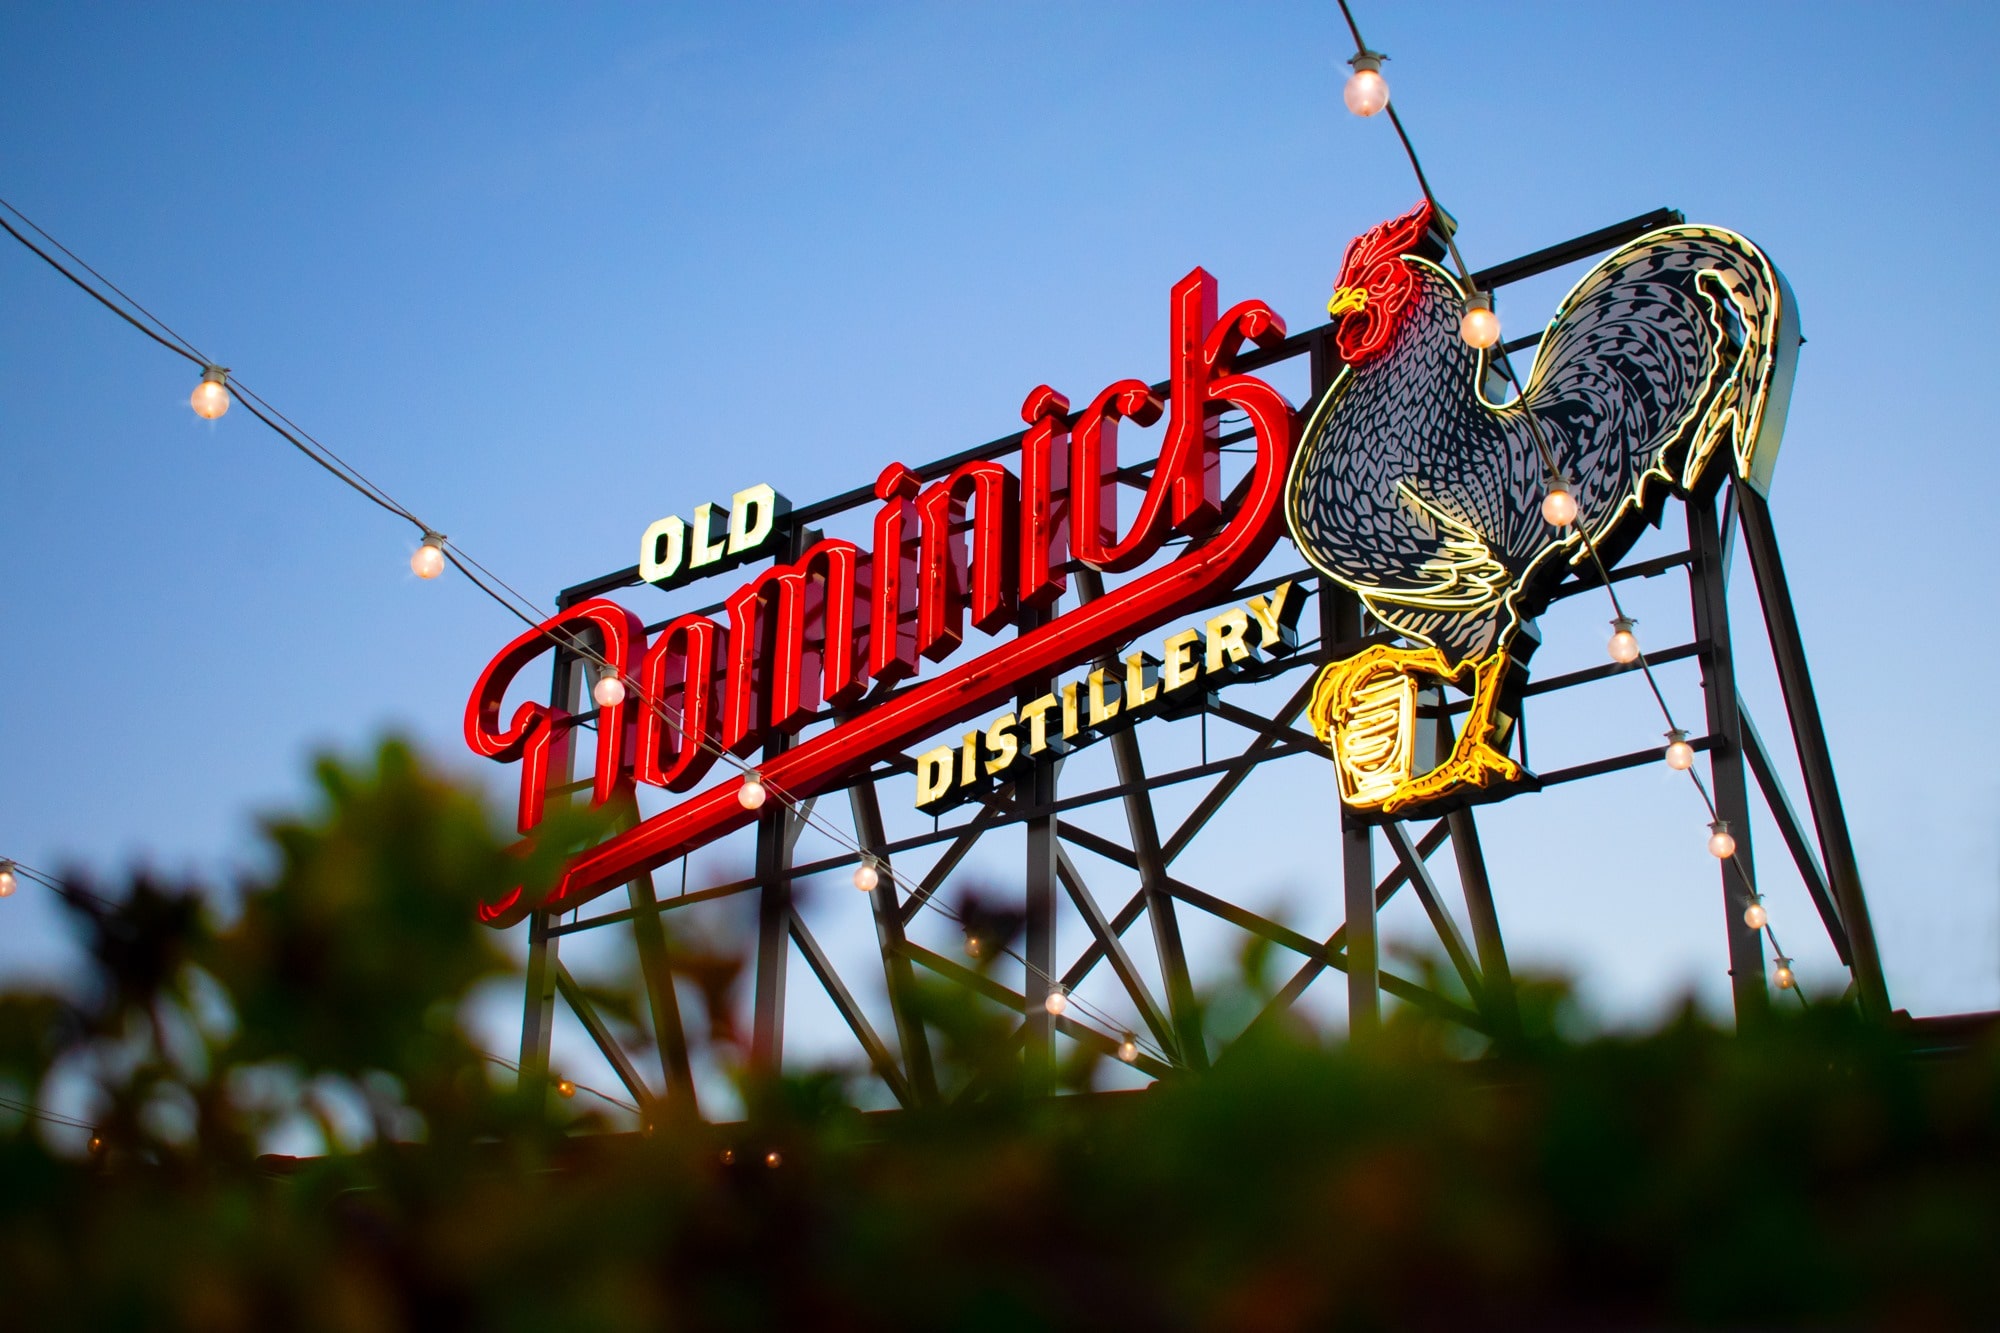 sign of Old Dominick Distillery in Memphis Tennessee with giant Rooster